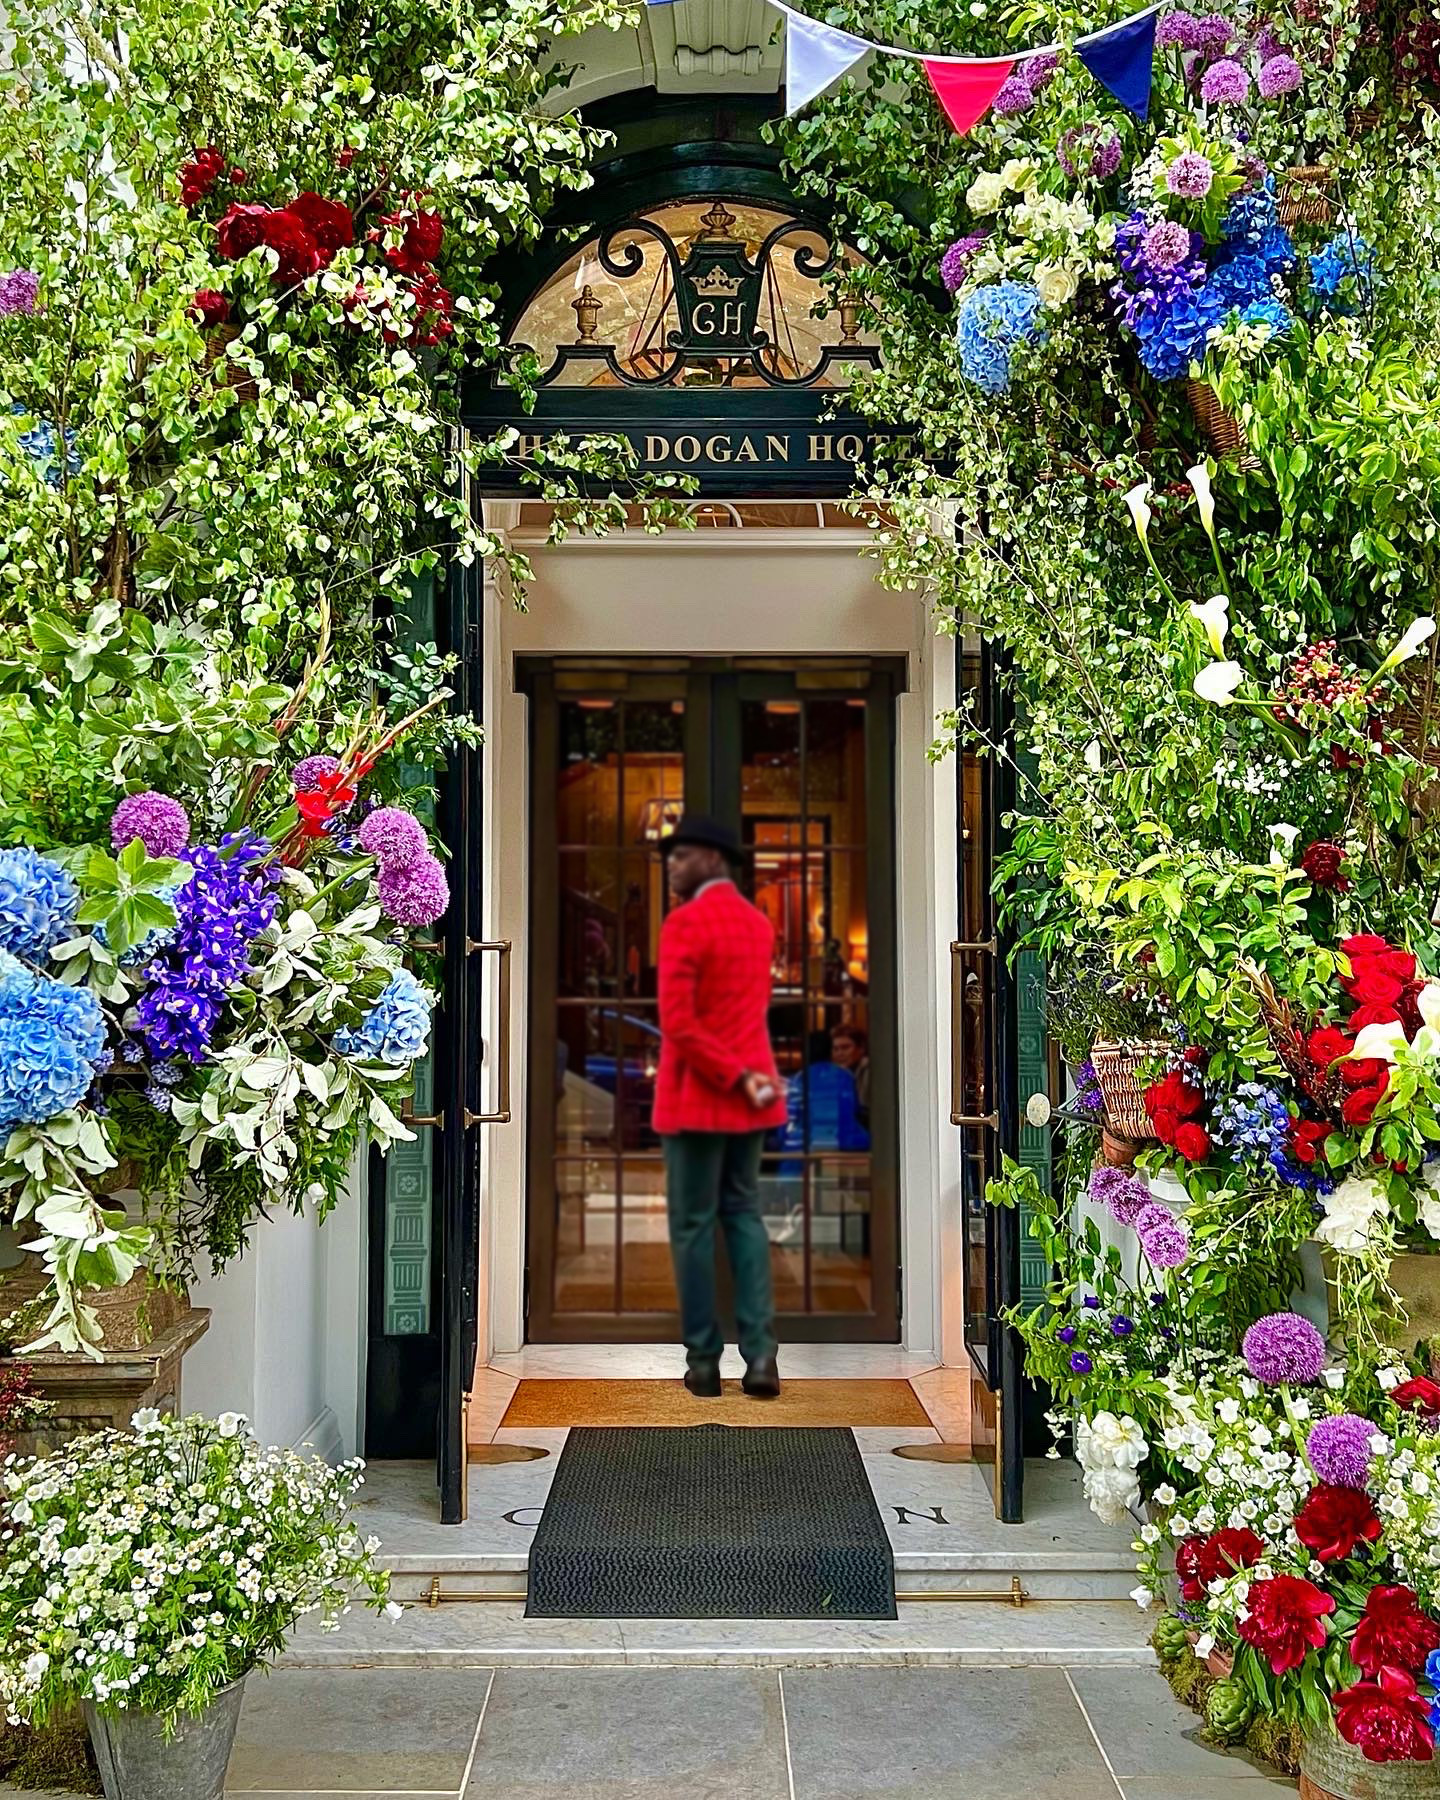 Colourful flowers surrounding the door to The Cadogan Hotel with a doorman in a red jacket about to enter 